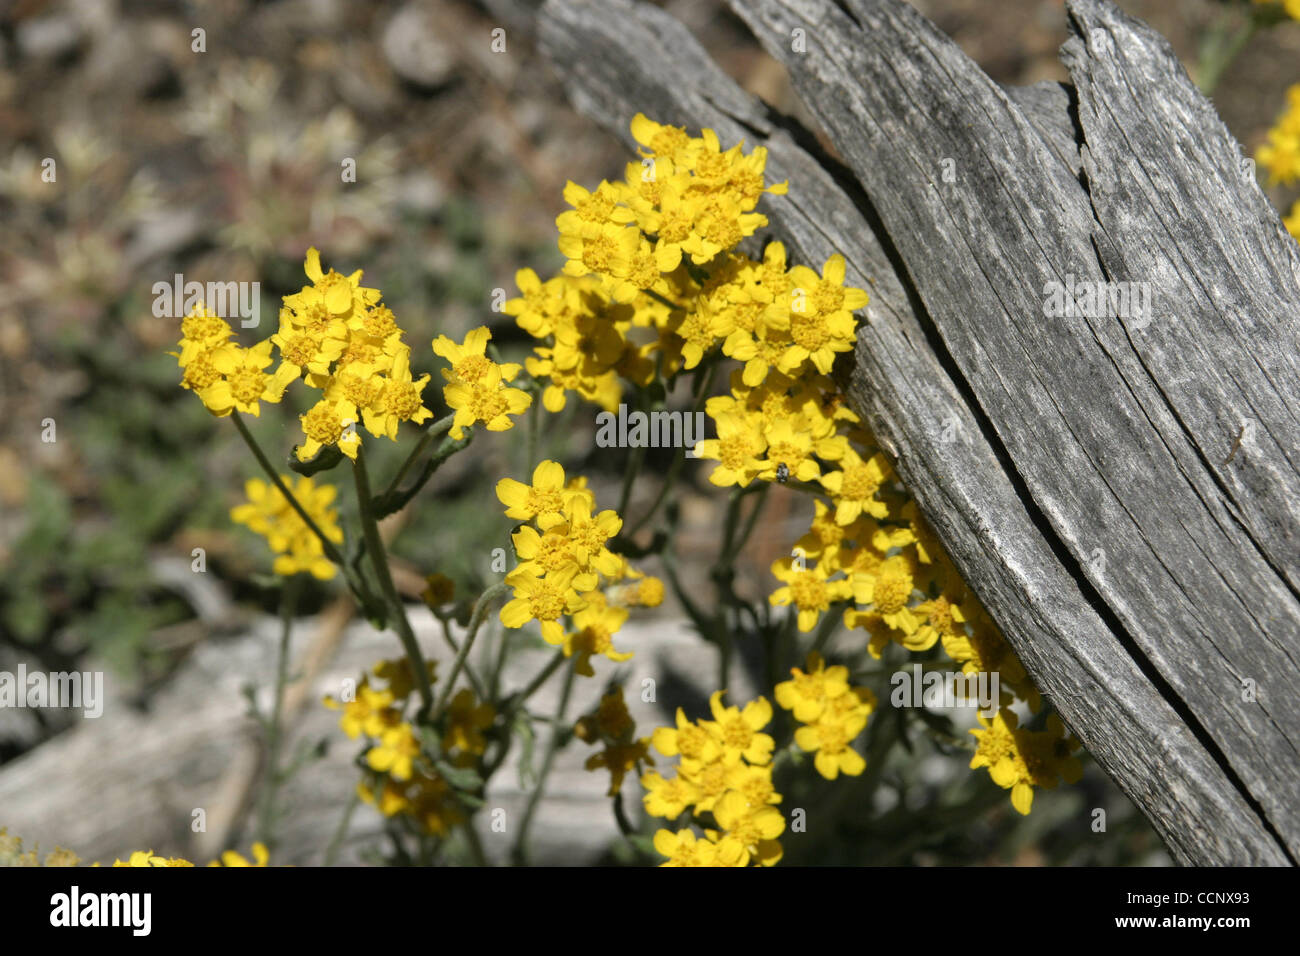 Jun 14, 2003 - Idyllwild, California, USA - This beautiful yellow wild flower common name Cinchweed and Scientific name Pectis papposa, these wildflowers are common between 1300-4000m. Pictured in the San Bernardino Forest of Southern California. (Credit Image: © Ruaridh Stewart/ZUMApress.com) Stock Photo